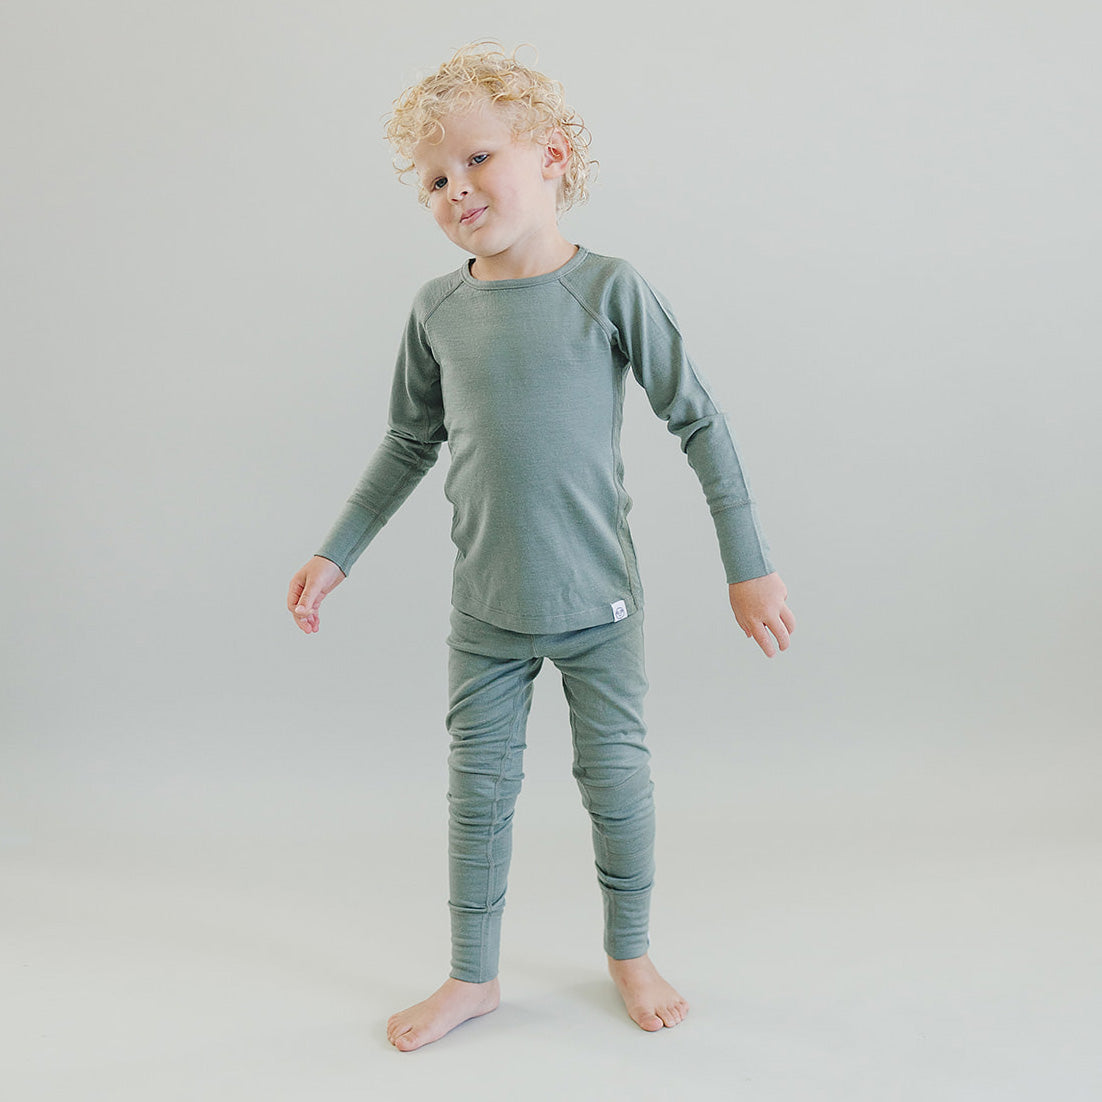 The Best Merino Wool Base Layers for Kids and Toddlers